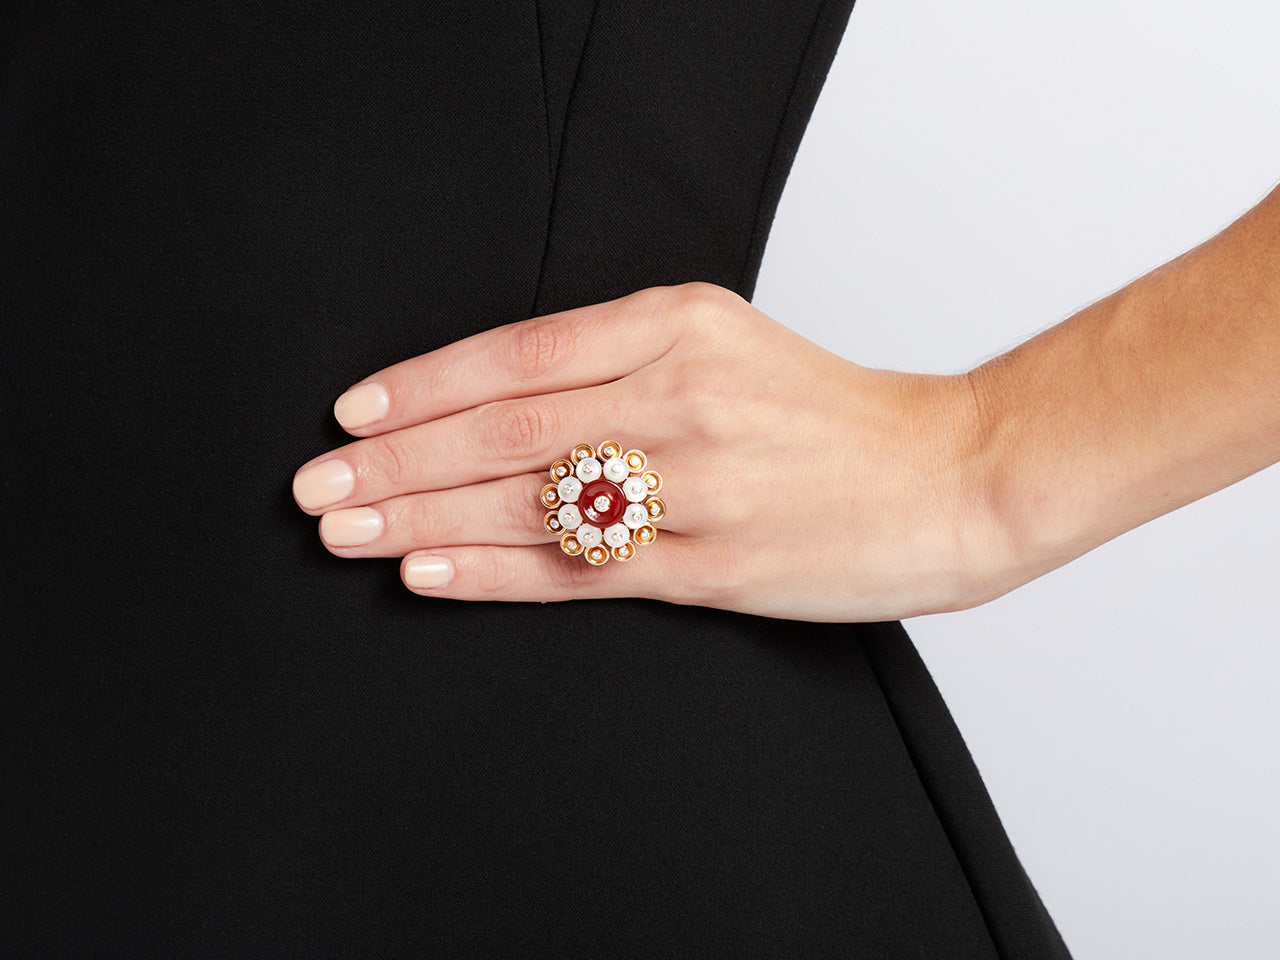 Van Cleef & Arpels 'Bouton d'or' Carnelian, Mother-of-Pearl and Diamond Ring in 18K Rose Gold